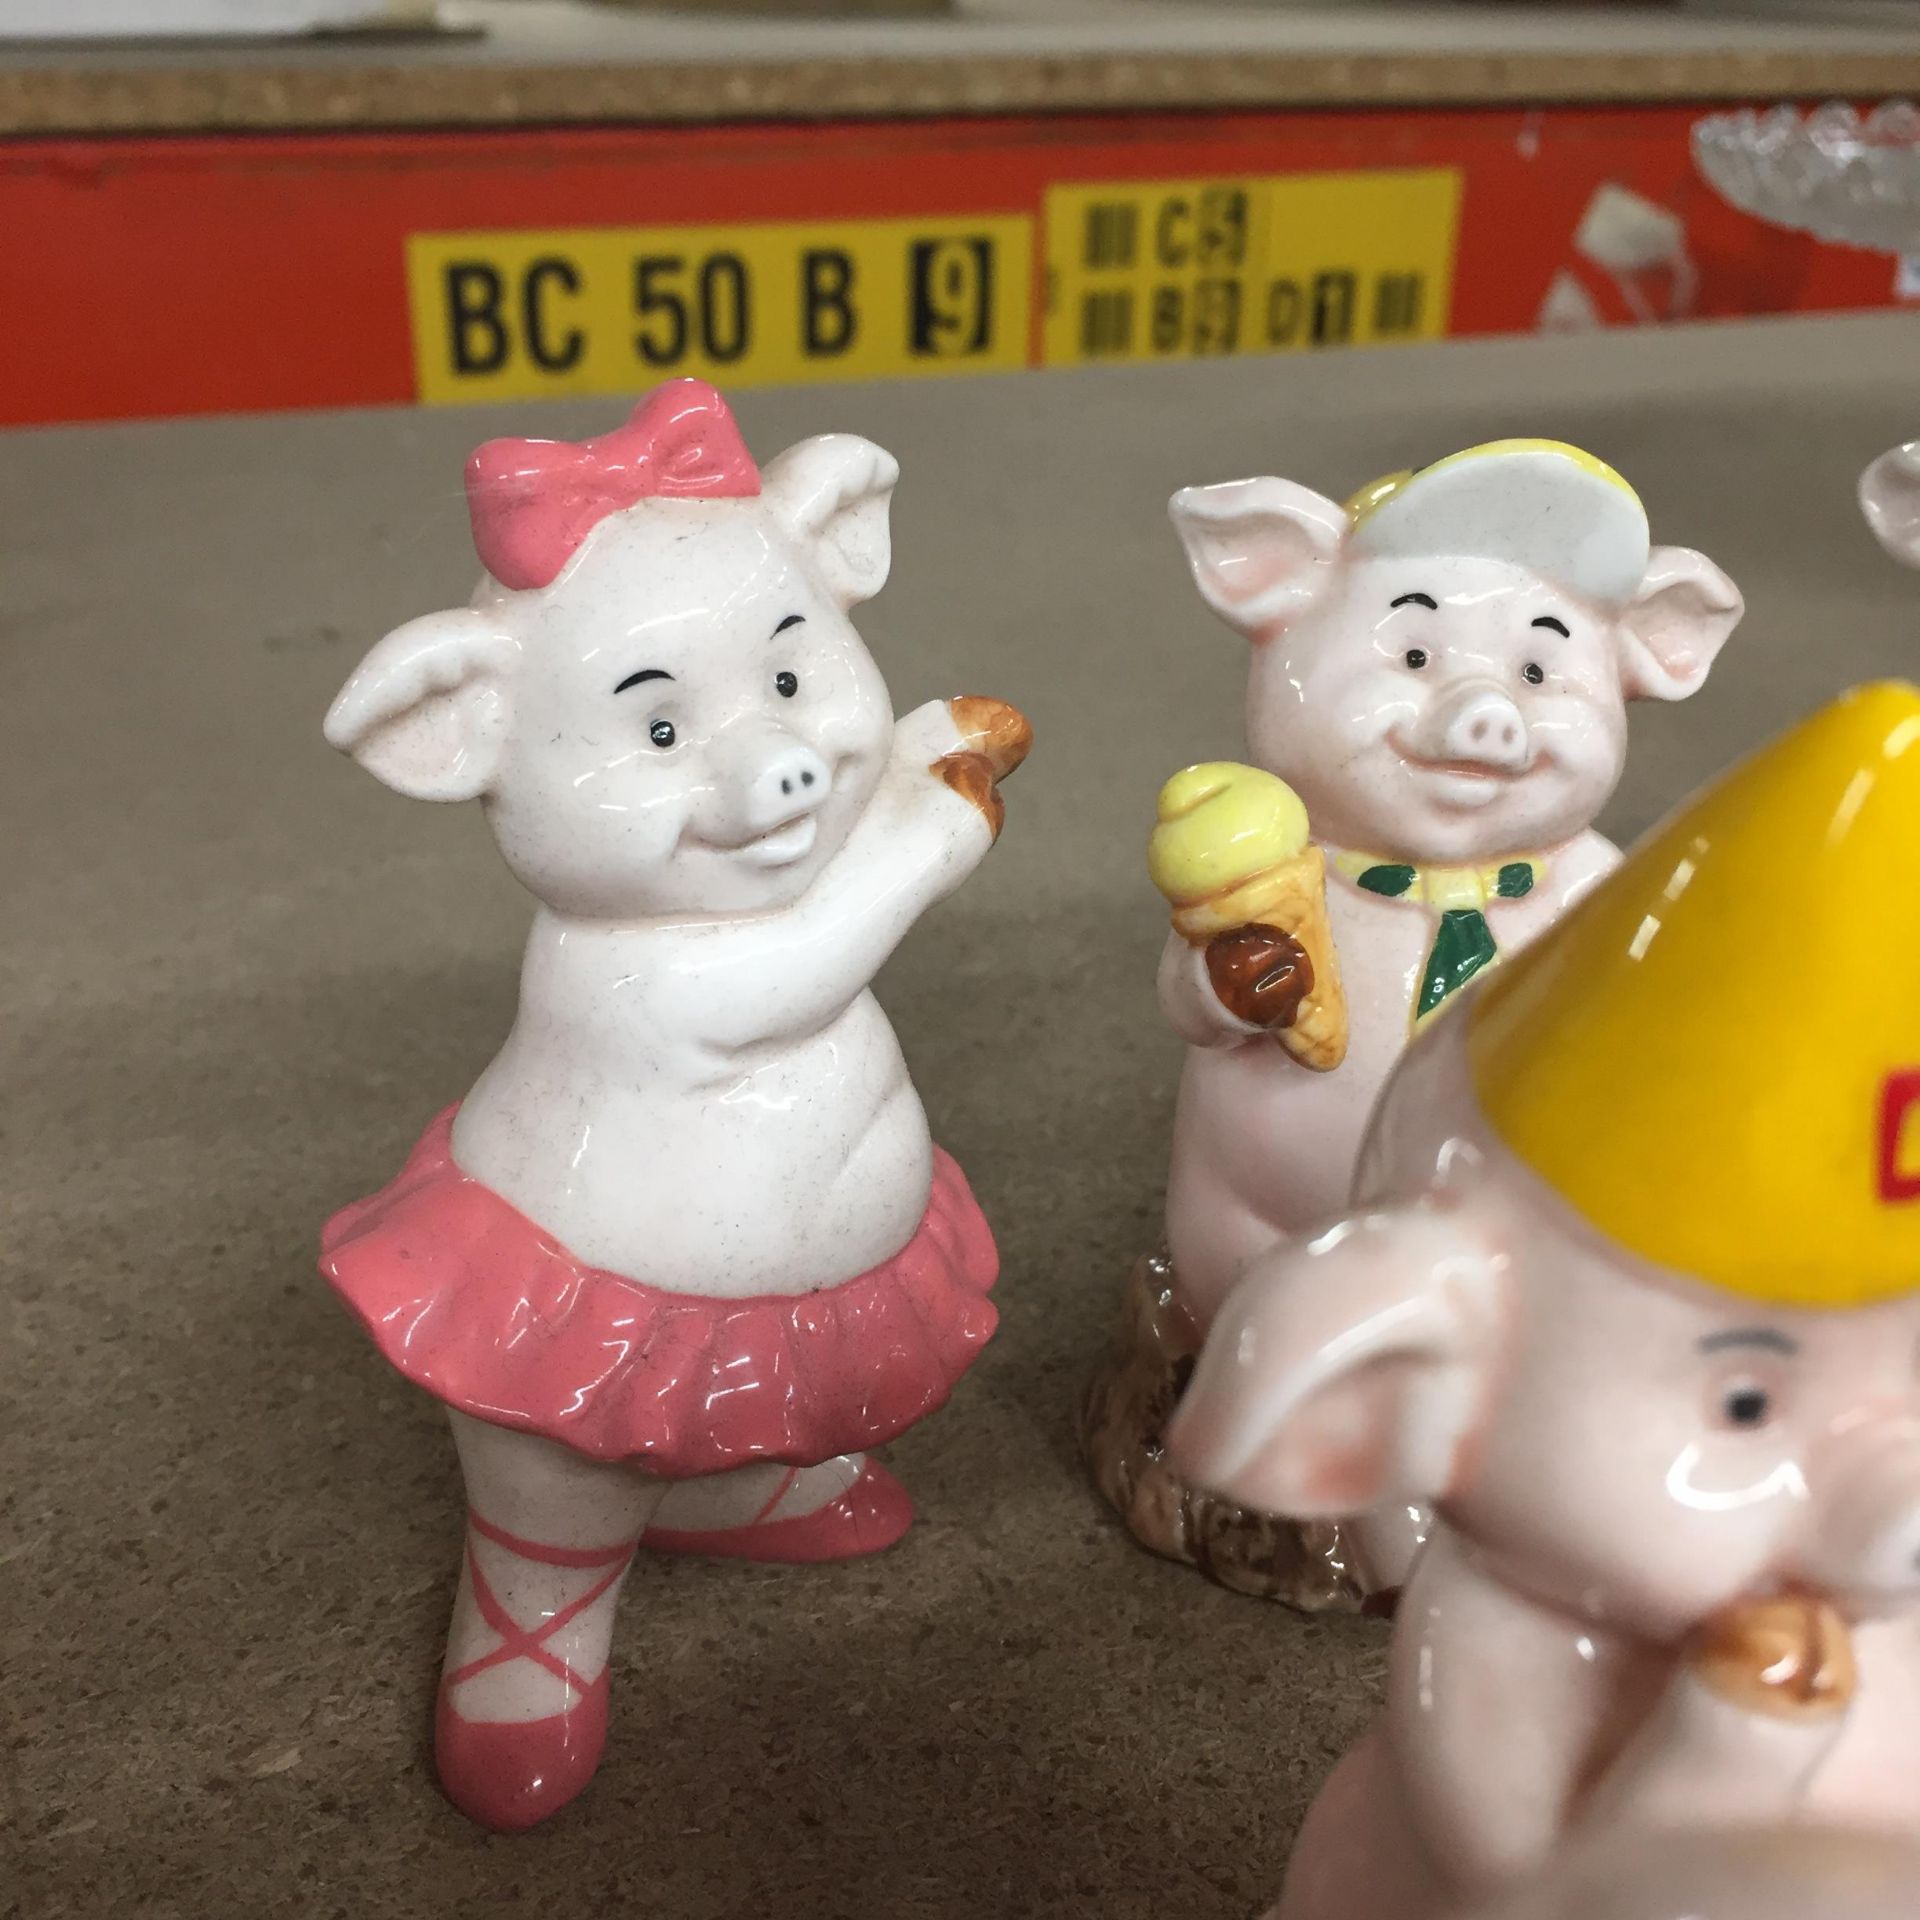 A COLLECTION OF 'PIGGIES' CERAMIC PIG FIGURES - Image 4 of 5